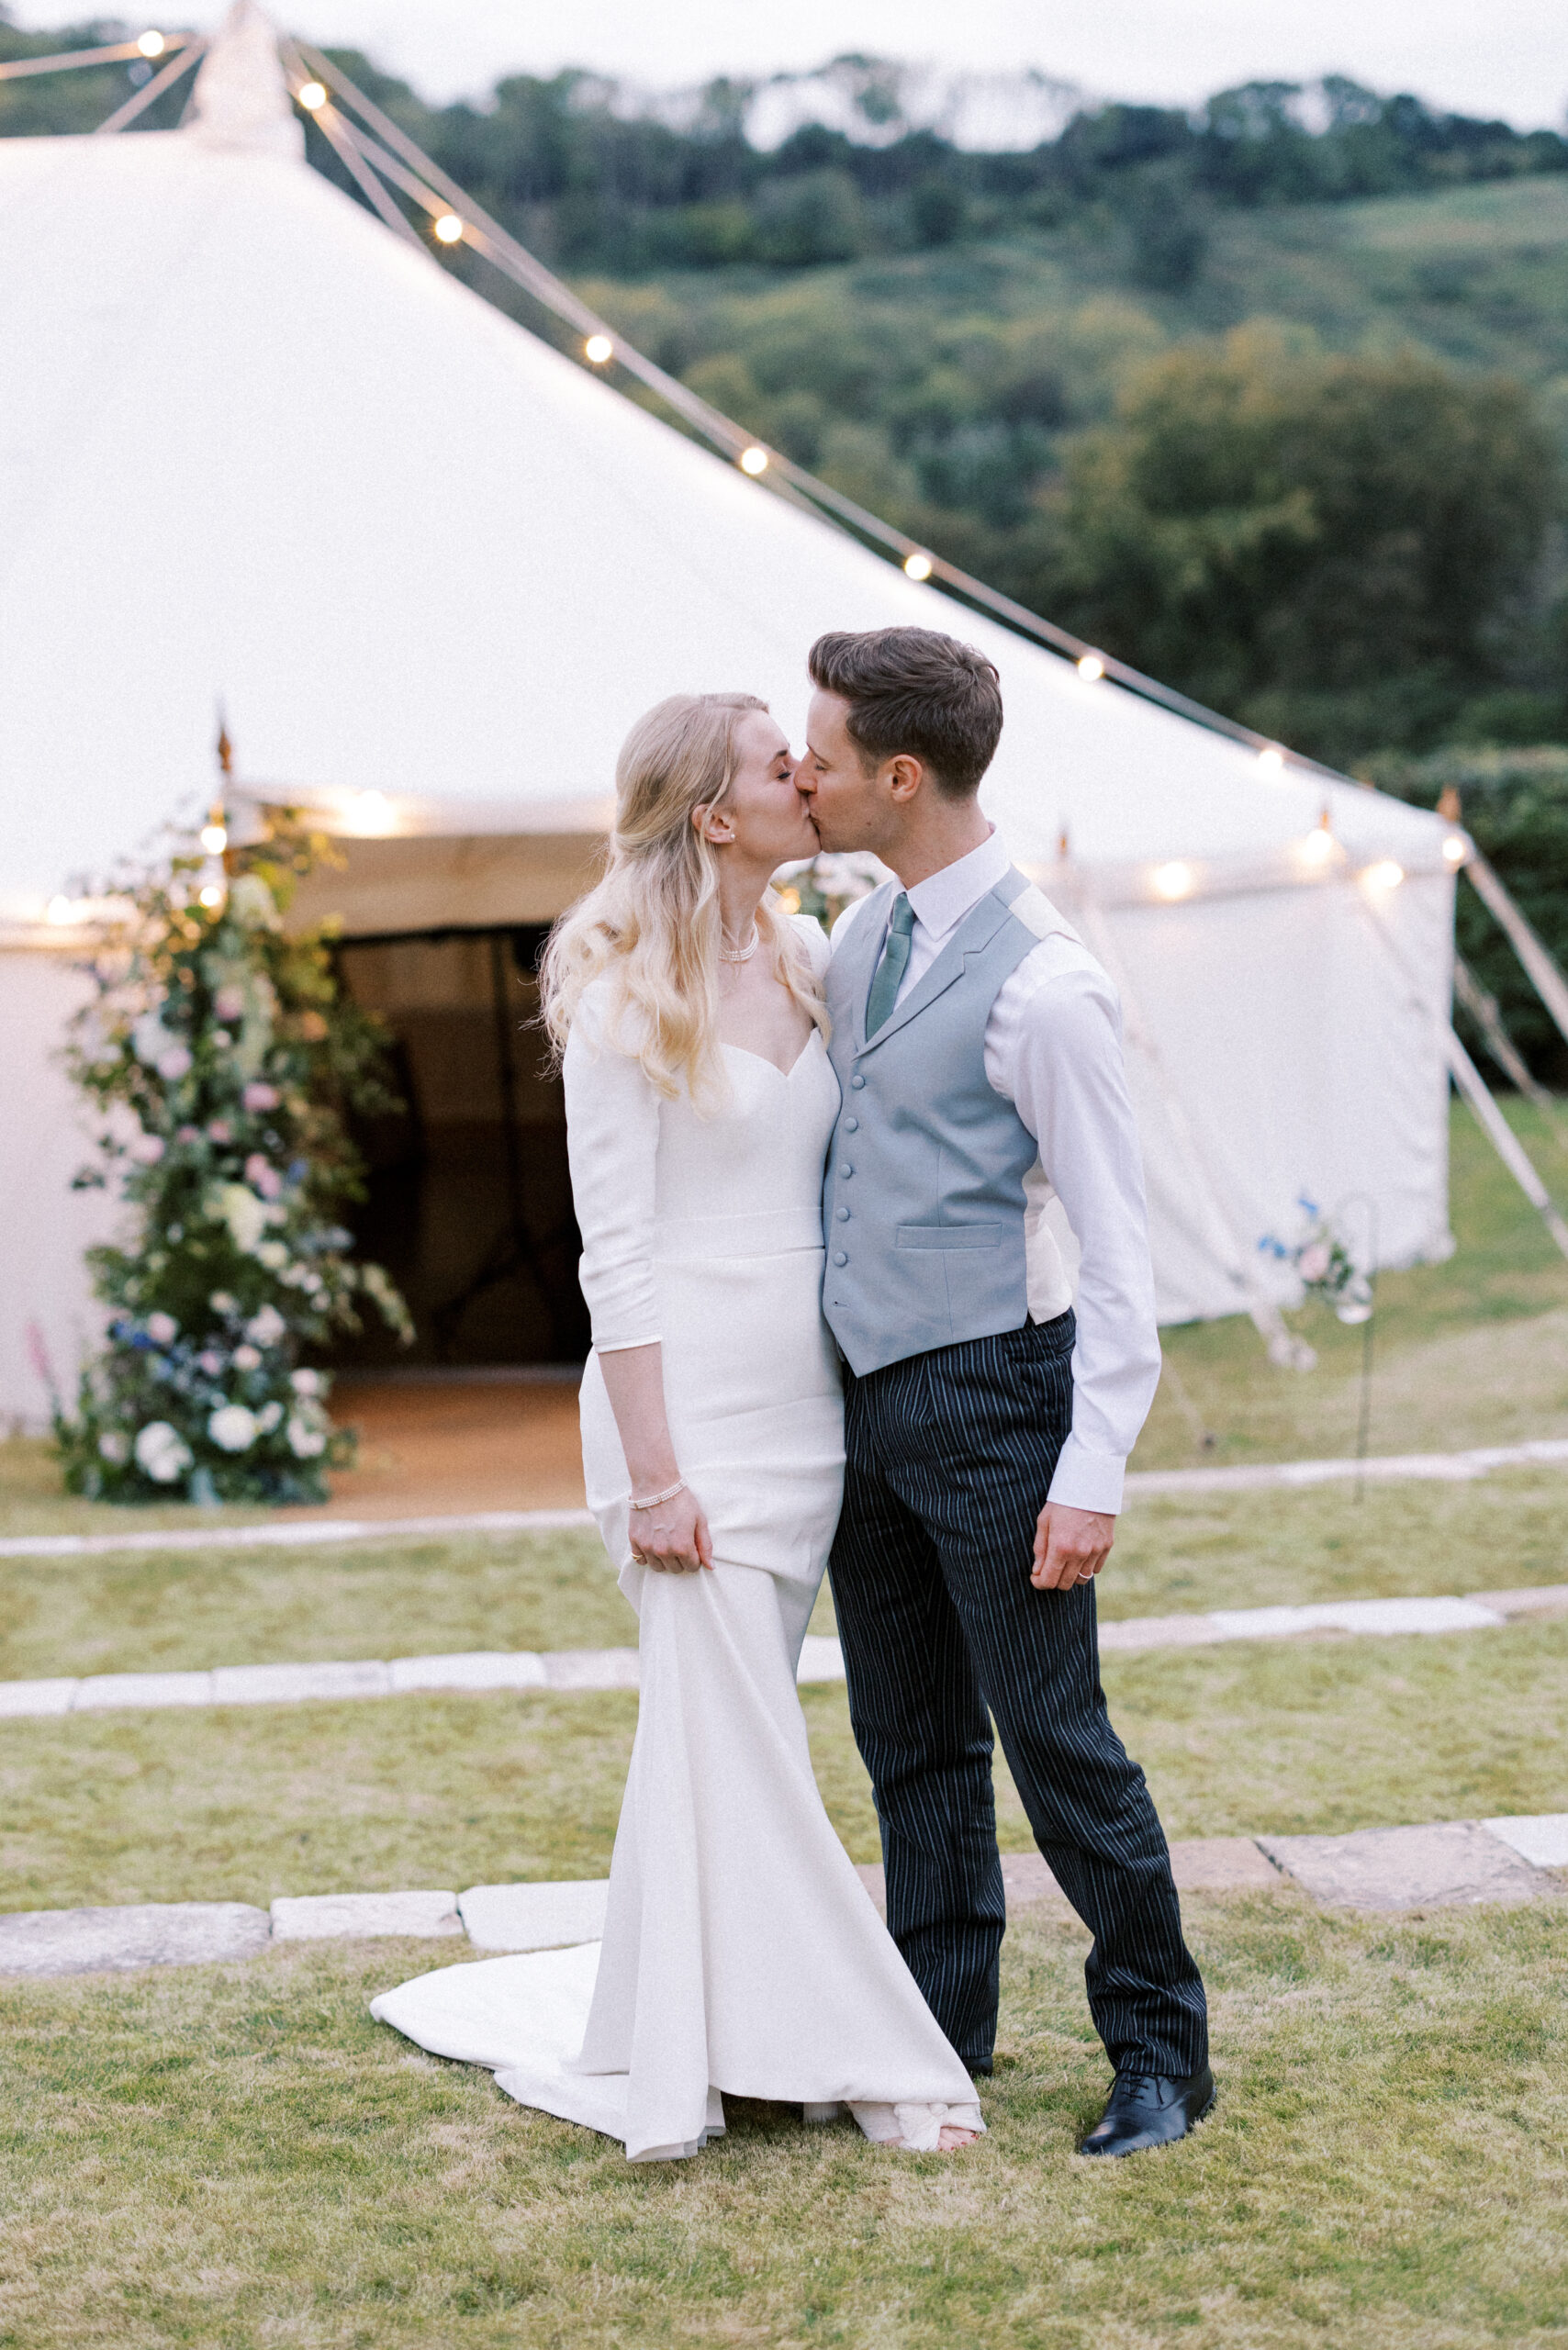 Romantic & Luxury wedding photography in West Sussex